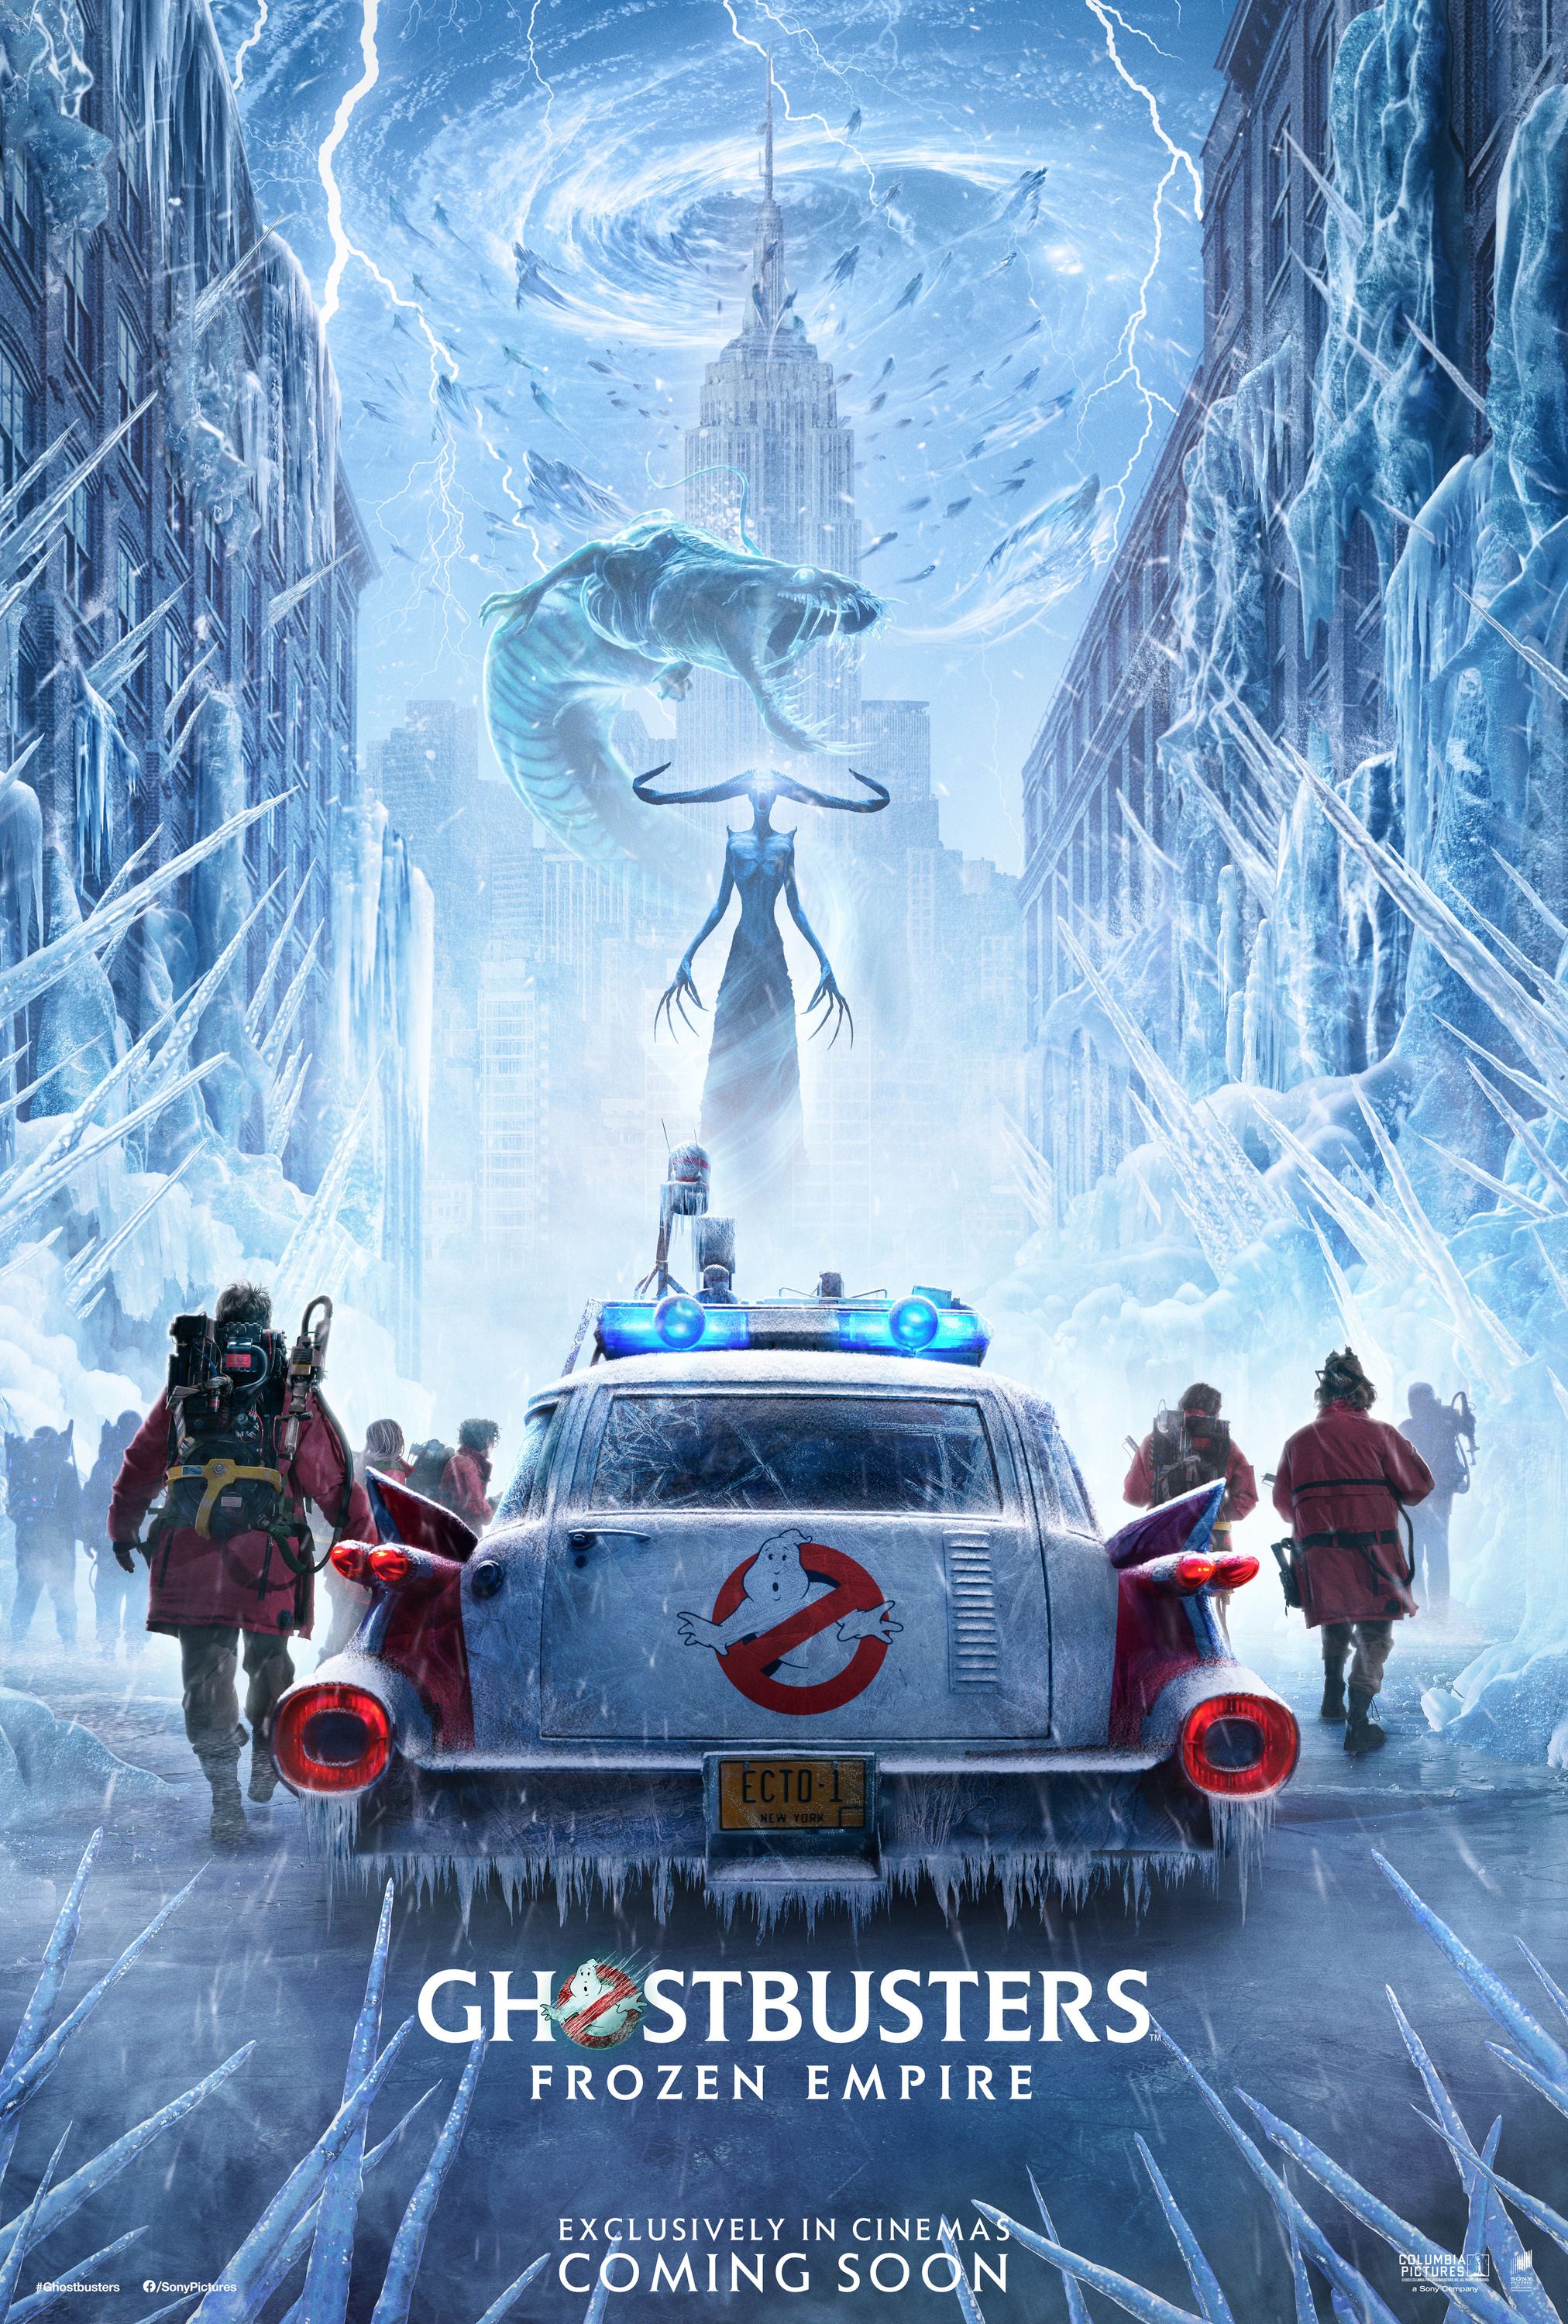 ‘Ghostbusters Frozen Empire’ Set Images Call on the Next Generation